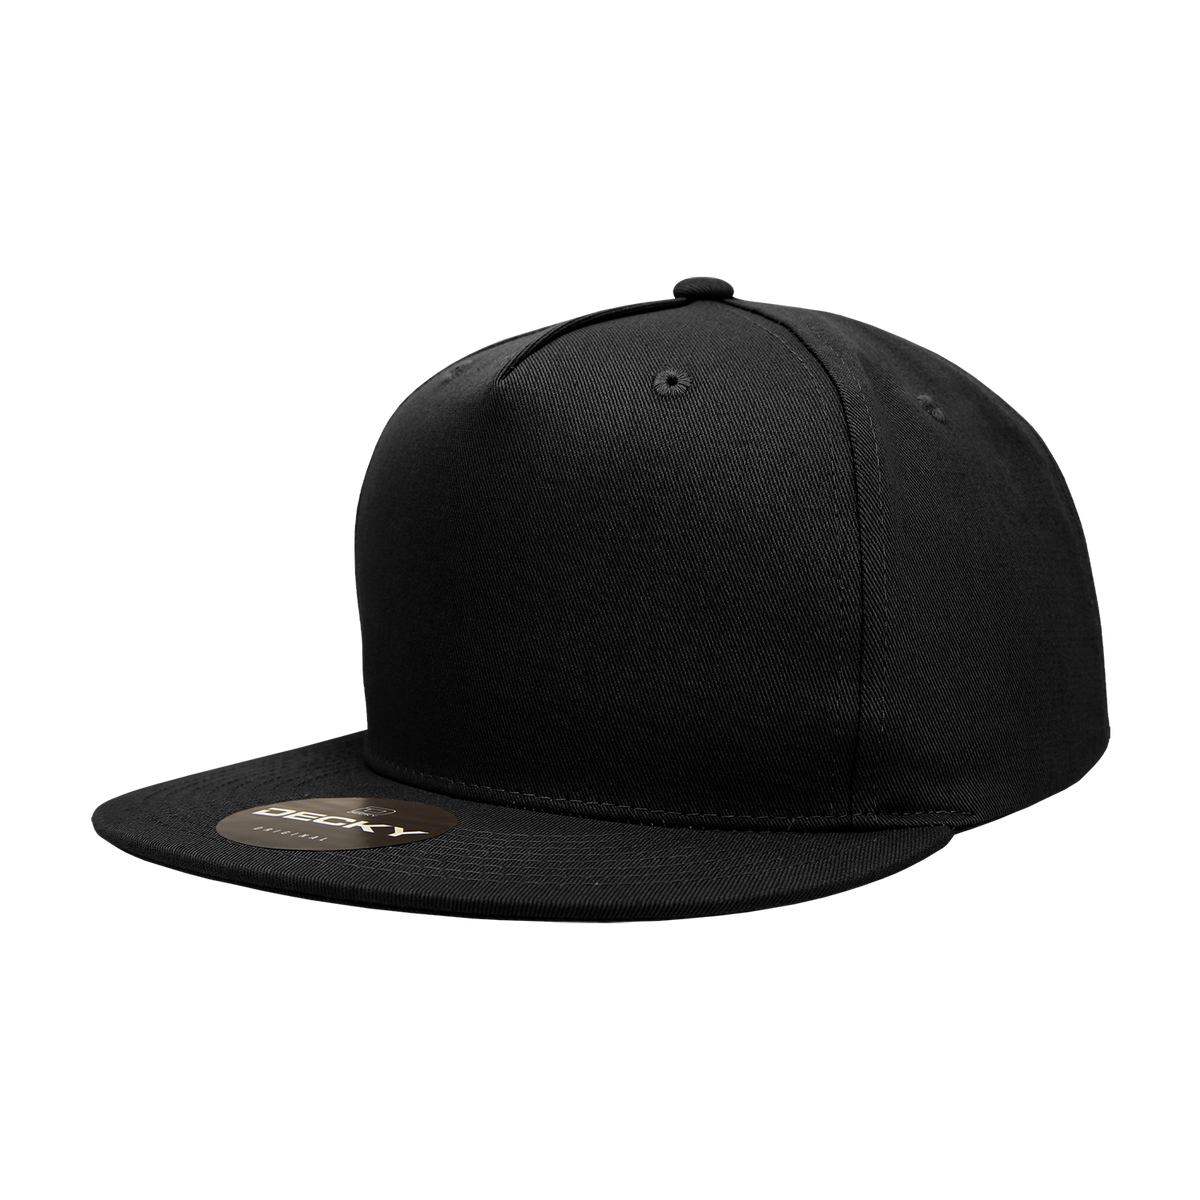 5 Panels Cap Short Brim Hat Flat Bill Cotton Blank Camping Hats Solid  Colors Low Crown Cap - China Wholesale 5 Panel Camper Hat $1.9 from  Dongguan 3H headwear Manufacturing Co., Ltd